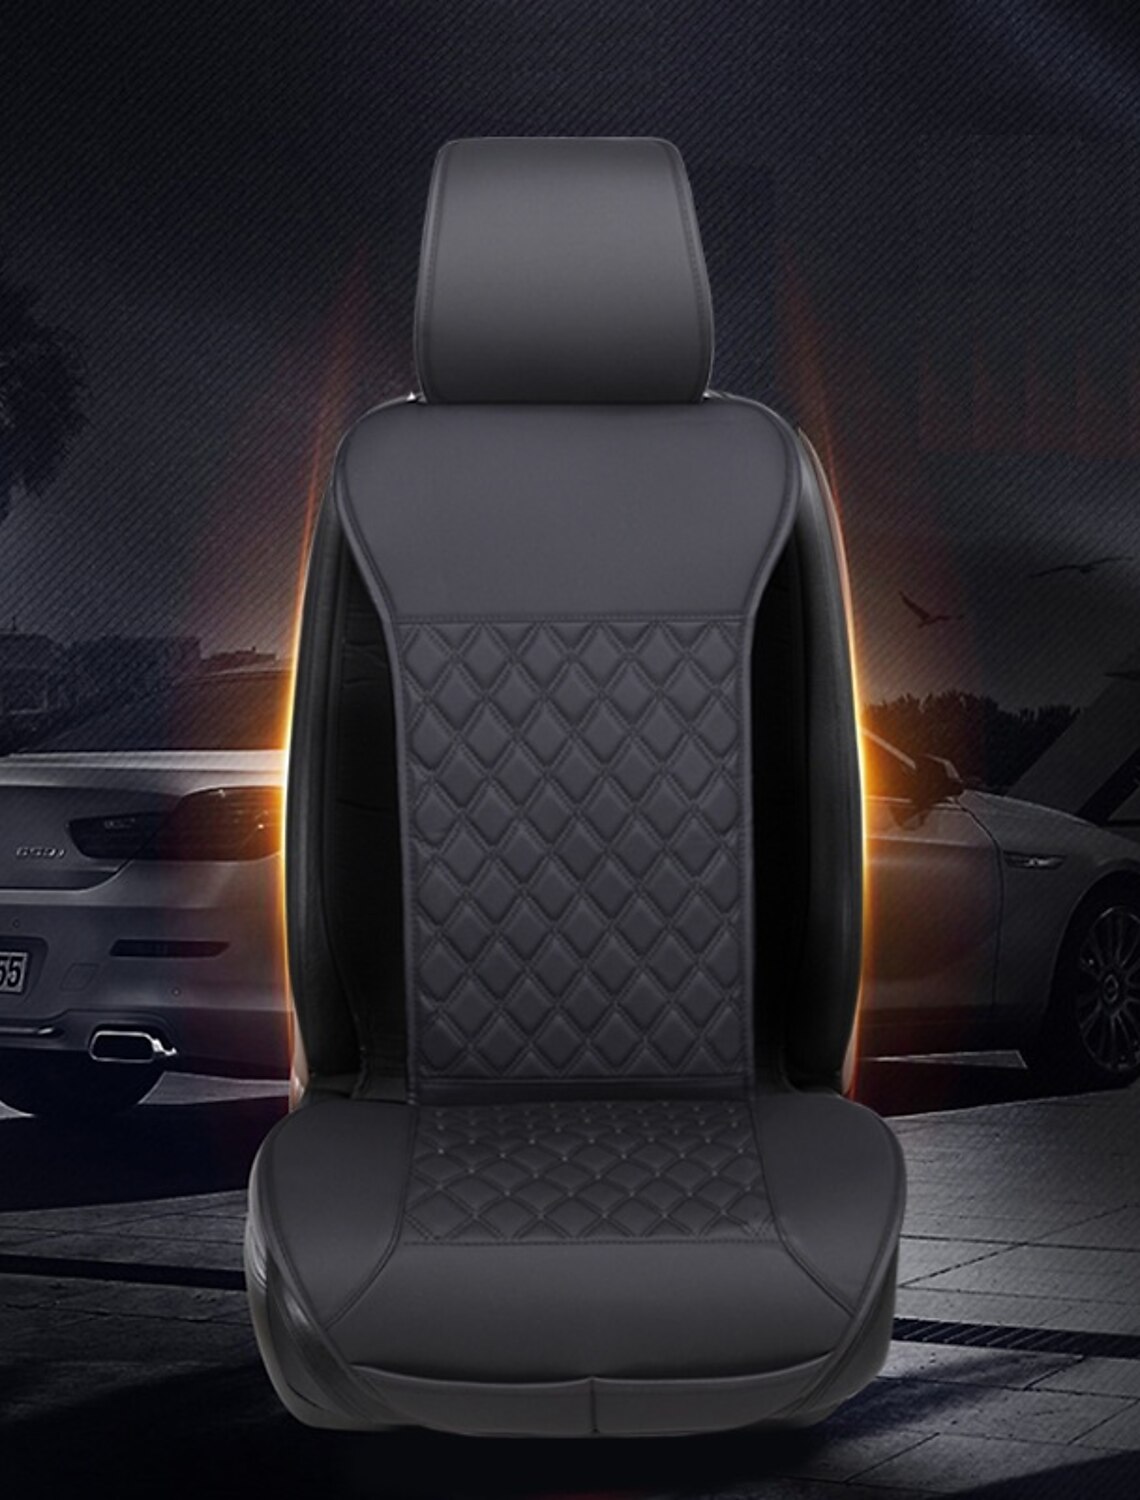 Auto Newer Luxury Breathable Car Seat Cover Fit Four Seasons Bottom Seat Covers of Full Wrapped Edge Grey，1PCS Universal Fit for 95% Cars,SUV,Pickup,Van Universal Front of Car Seat Cushions 